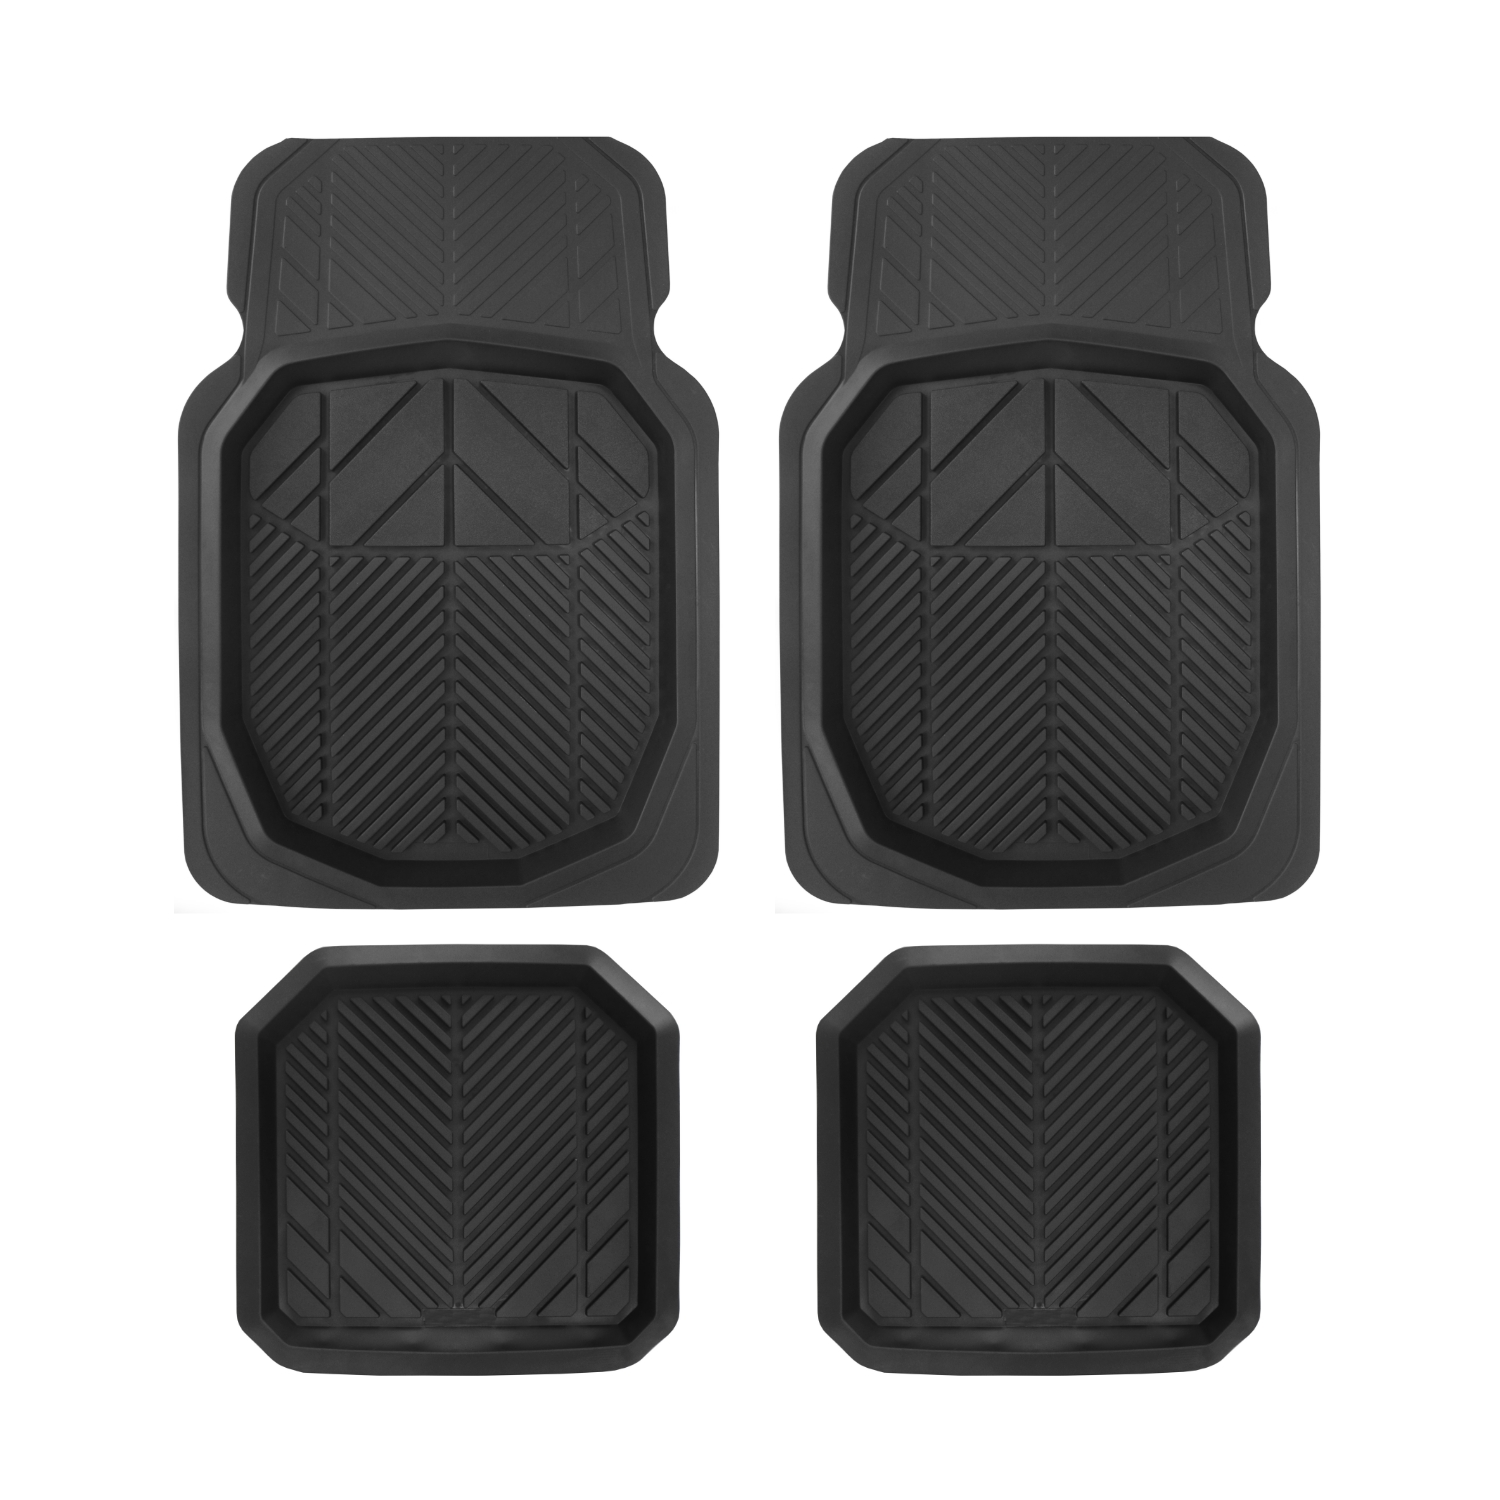 Buy Best Car Mat Pvc Factories –  Universal basics 3-Piece All-Weather Protection Heavy Duty Rubber Floor Mats for Cars, SUVs, and Trucks 1884 – Litai